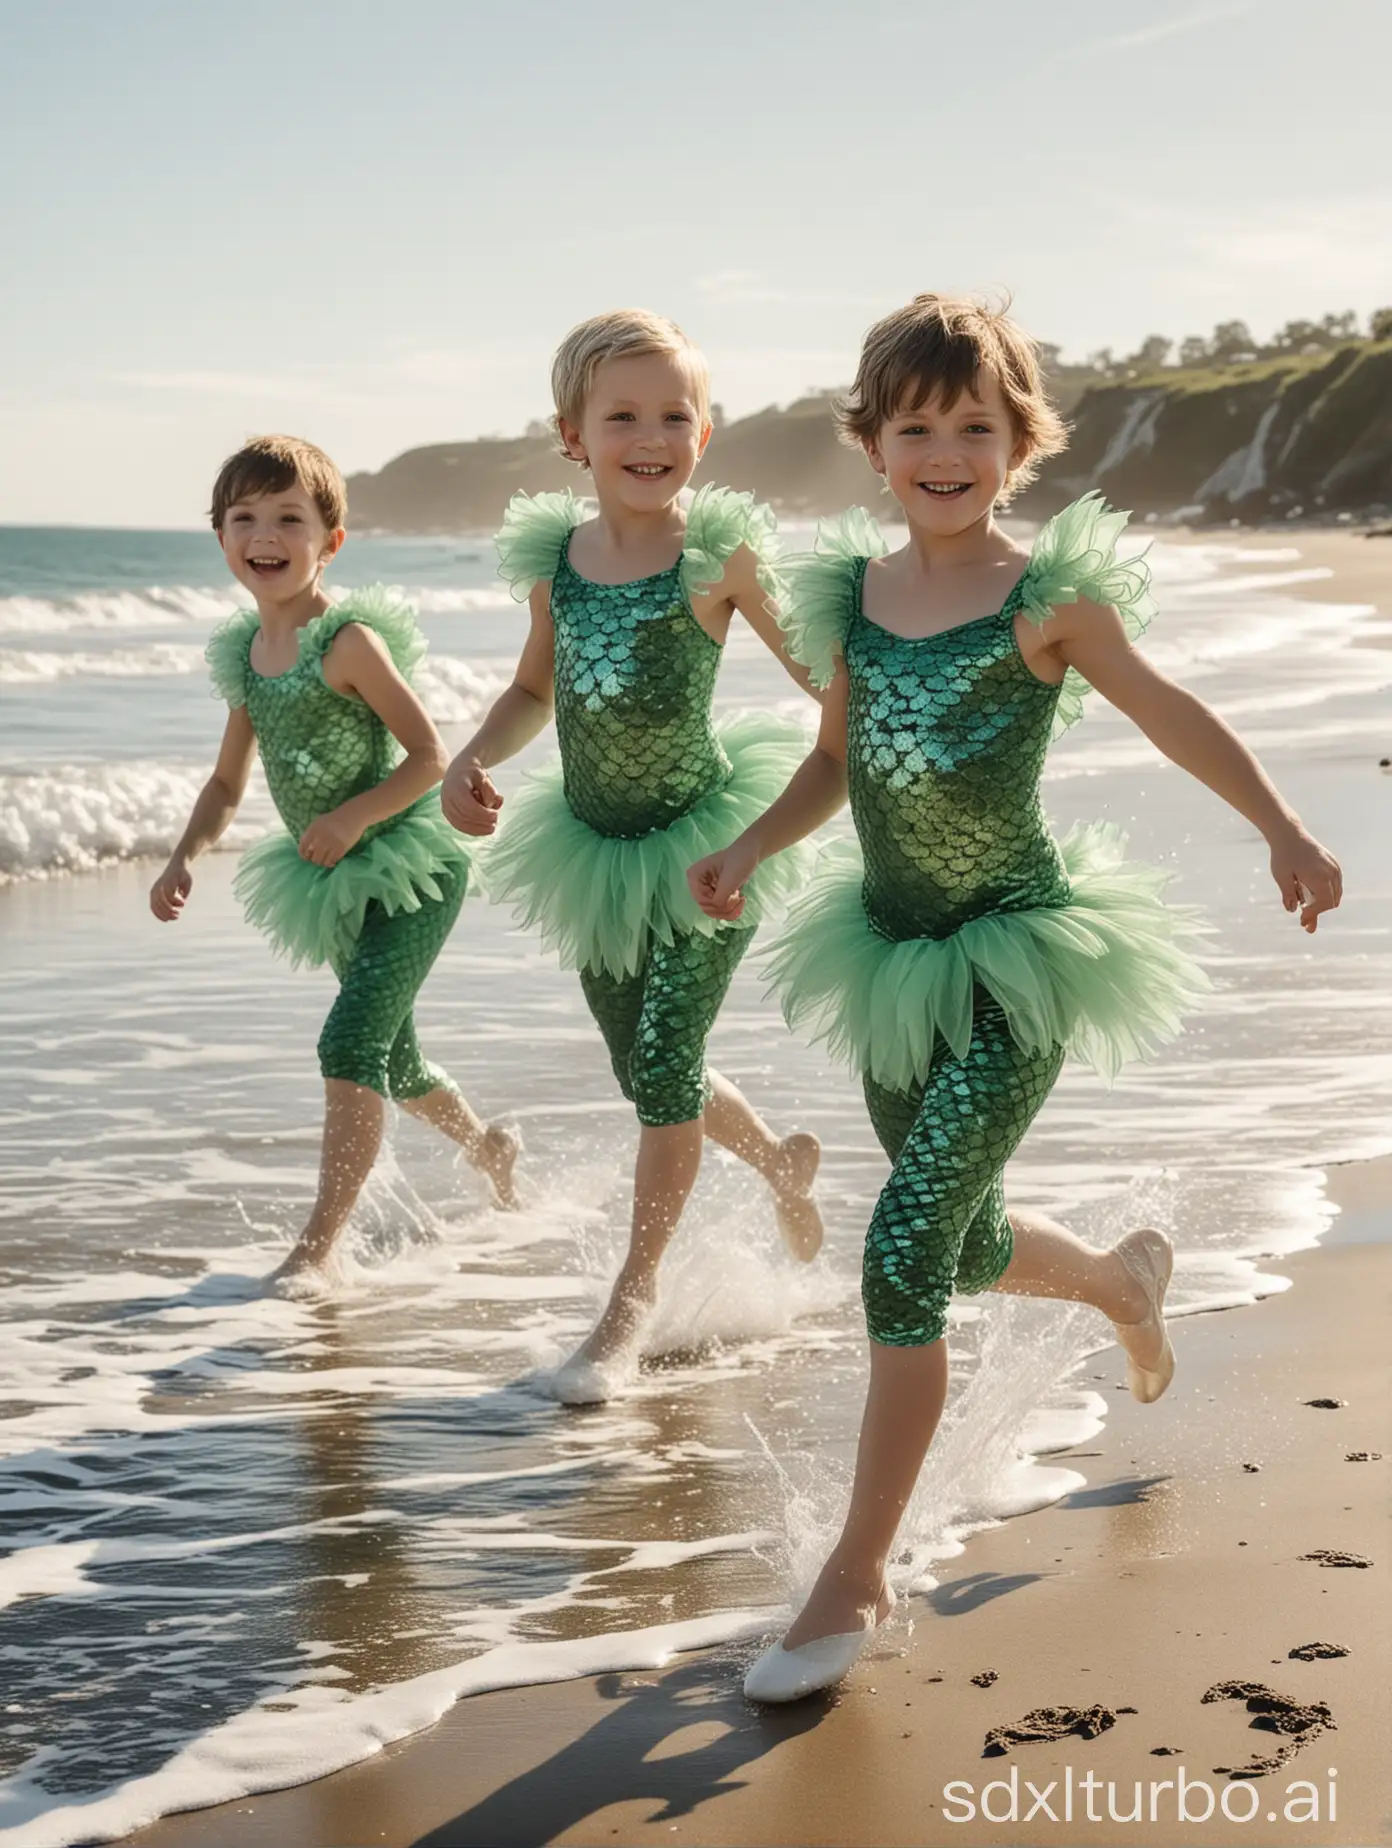 (((Gender role reversal))), A bunch of short-haired 8-year-old boys running cheerfully along a beach shoreline in silky scaly green ballerina-mermaid leotards with sleeves and frilly tutus, energetic